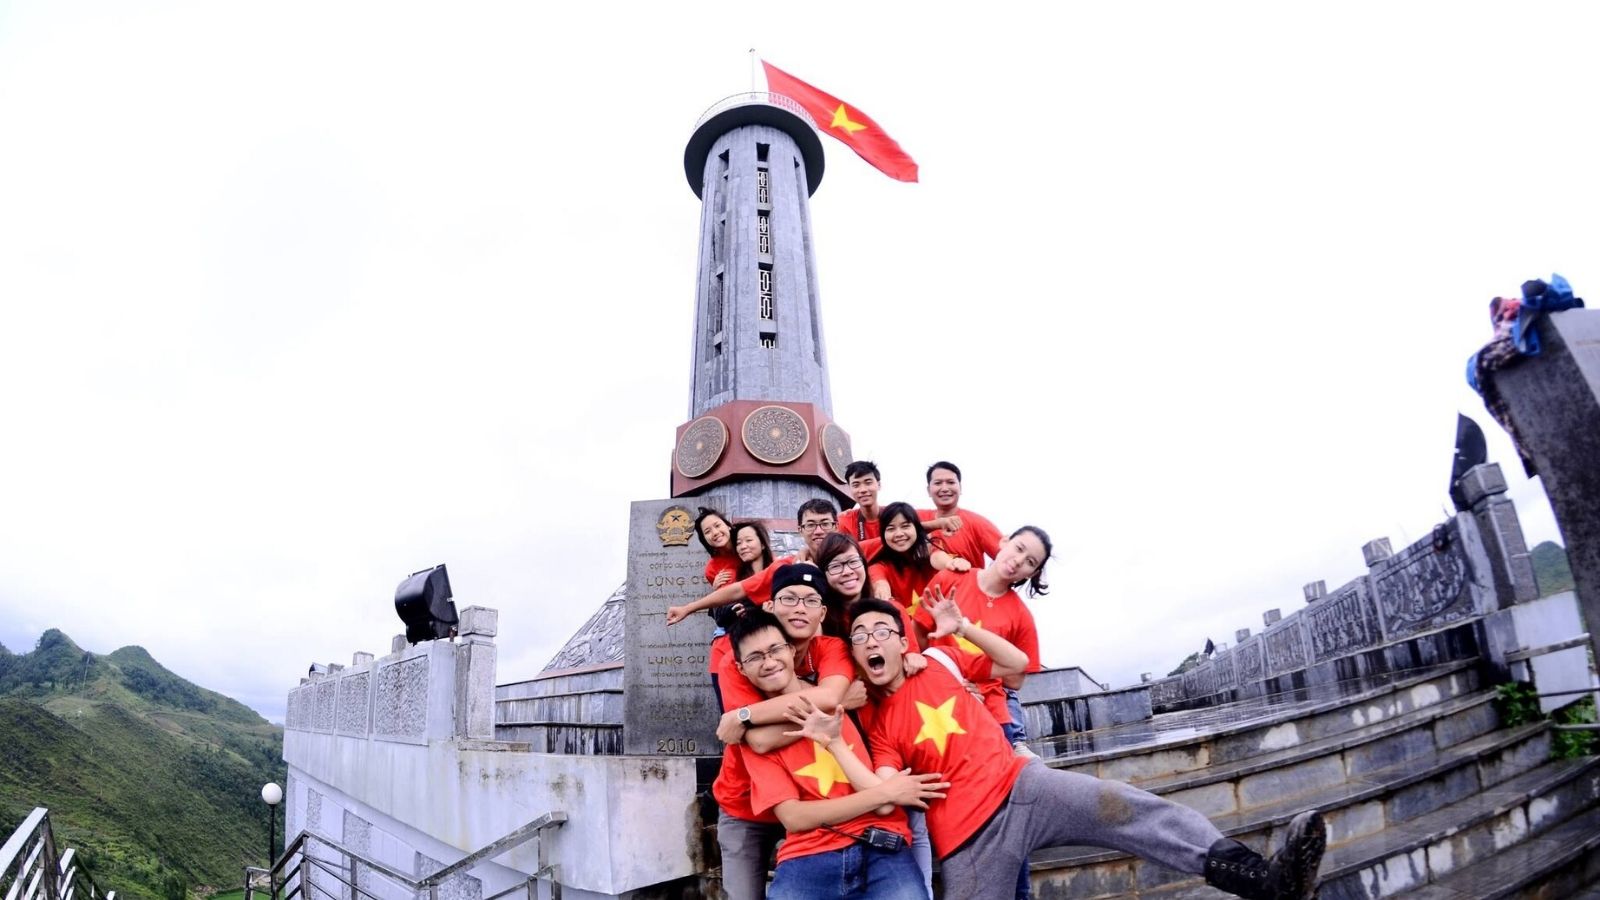 Lung Cu Flag Tower in Ha Giang, Vietnam